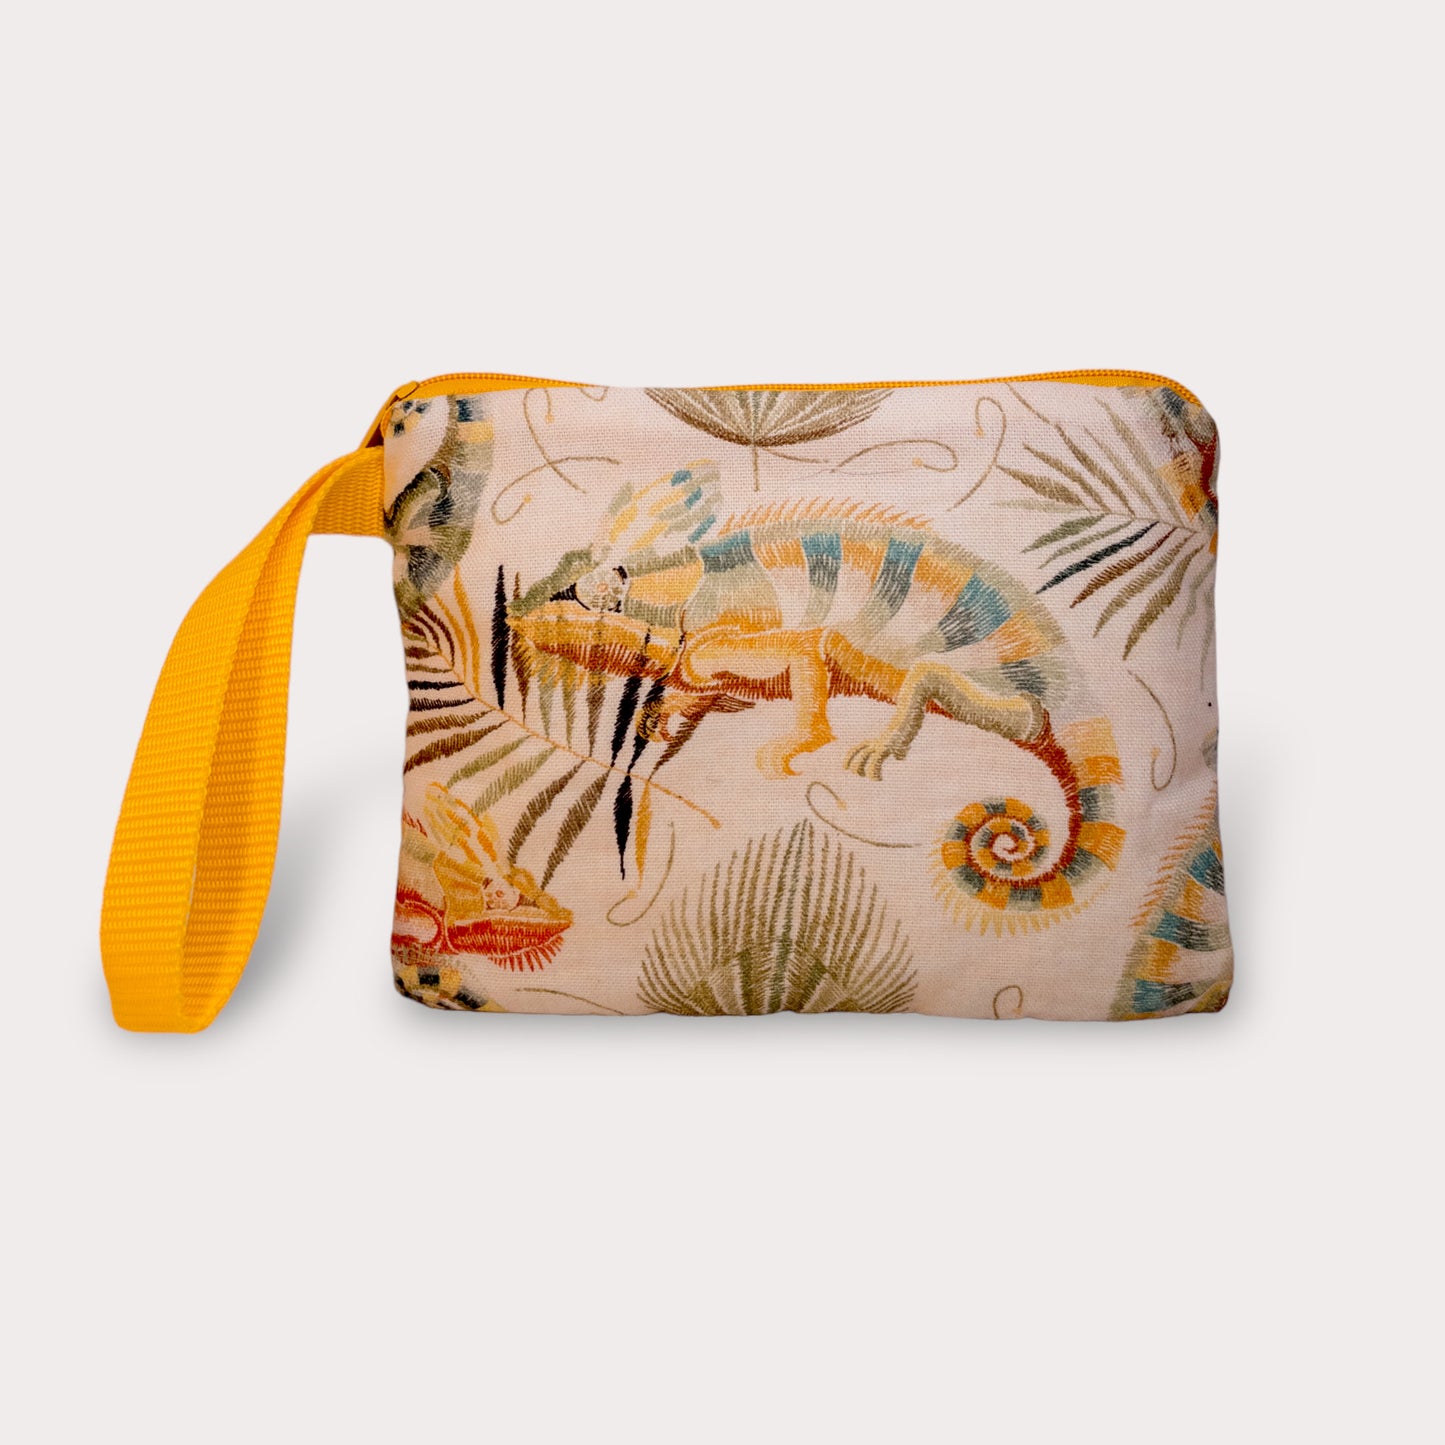 Large Pouch . Chameleon. Fabric